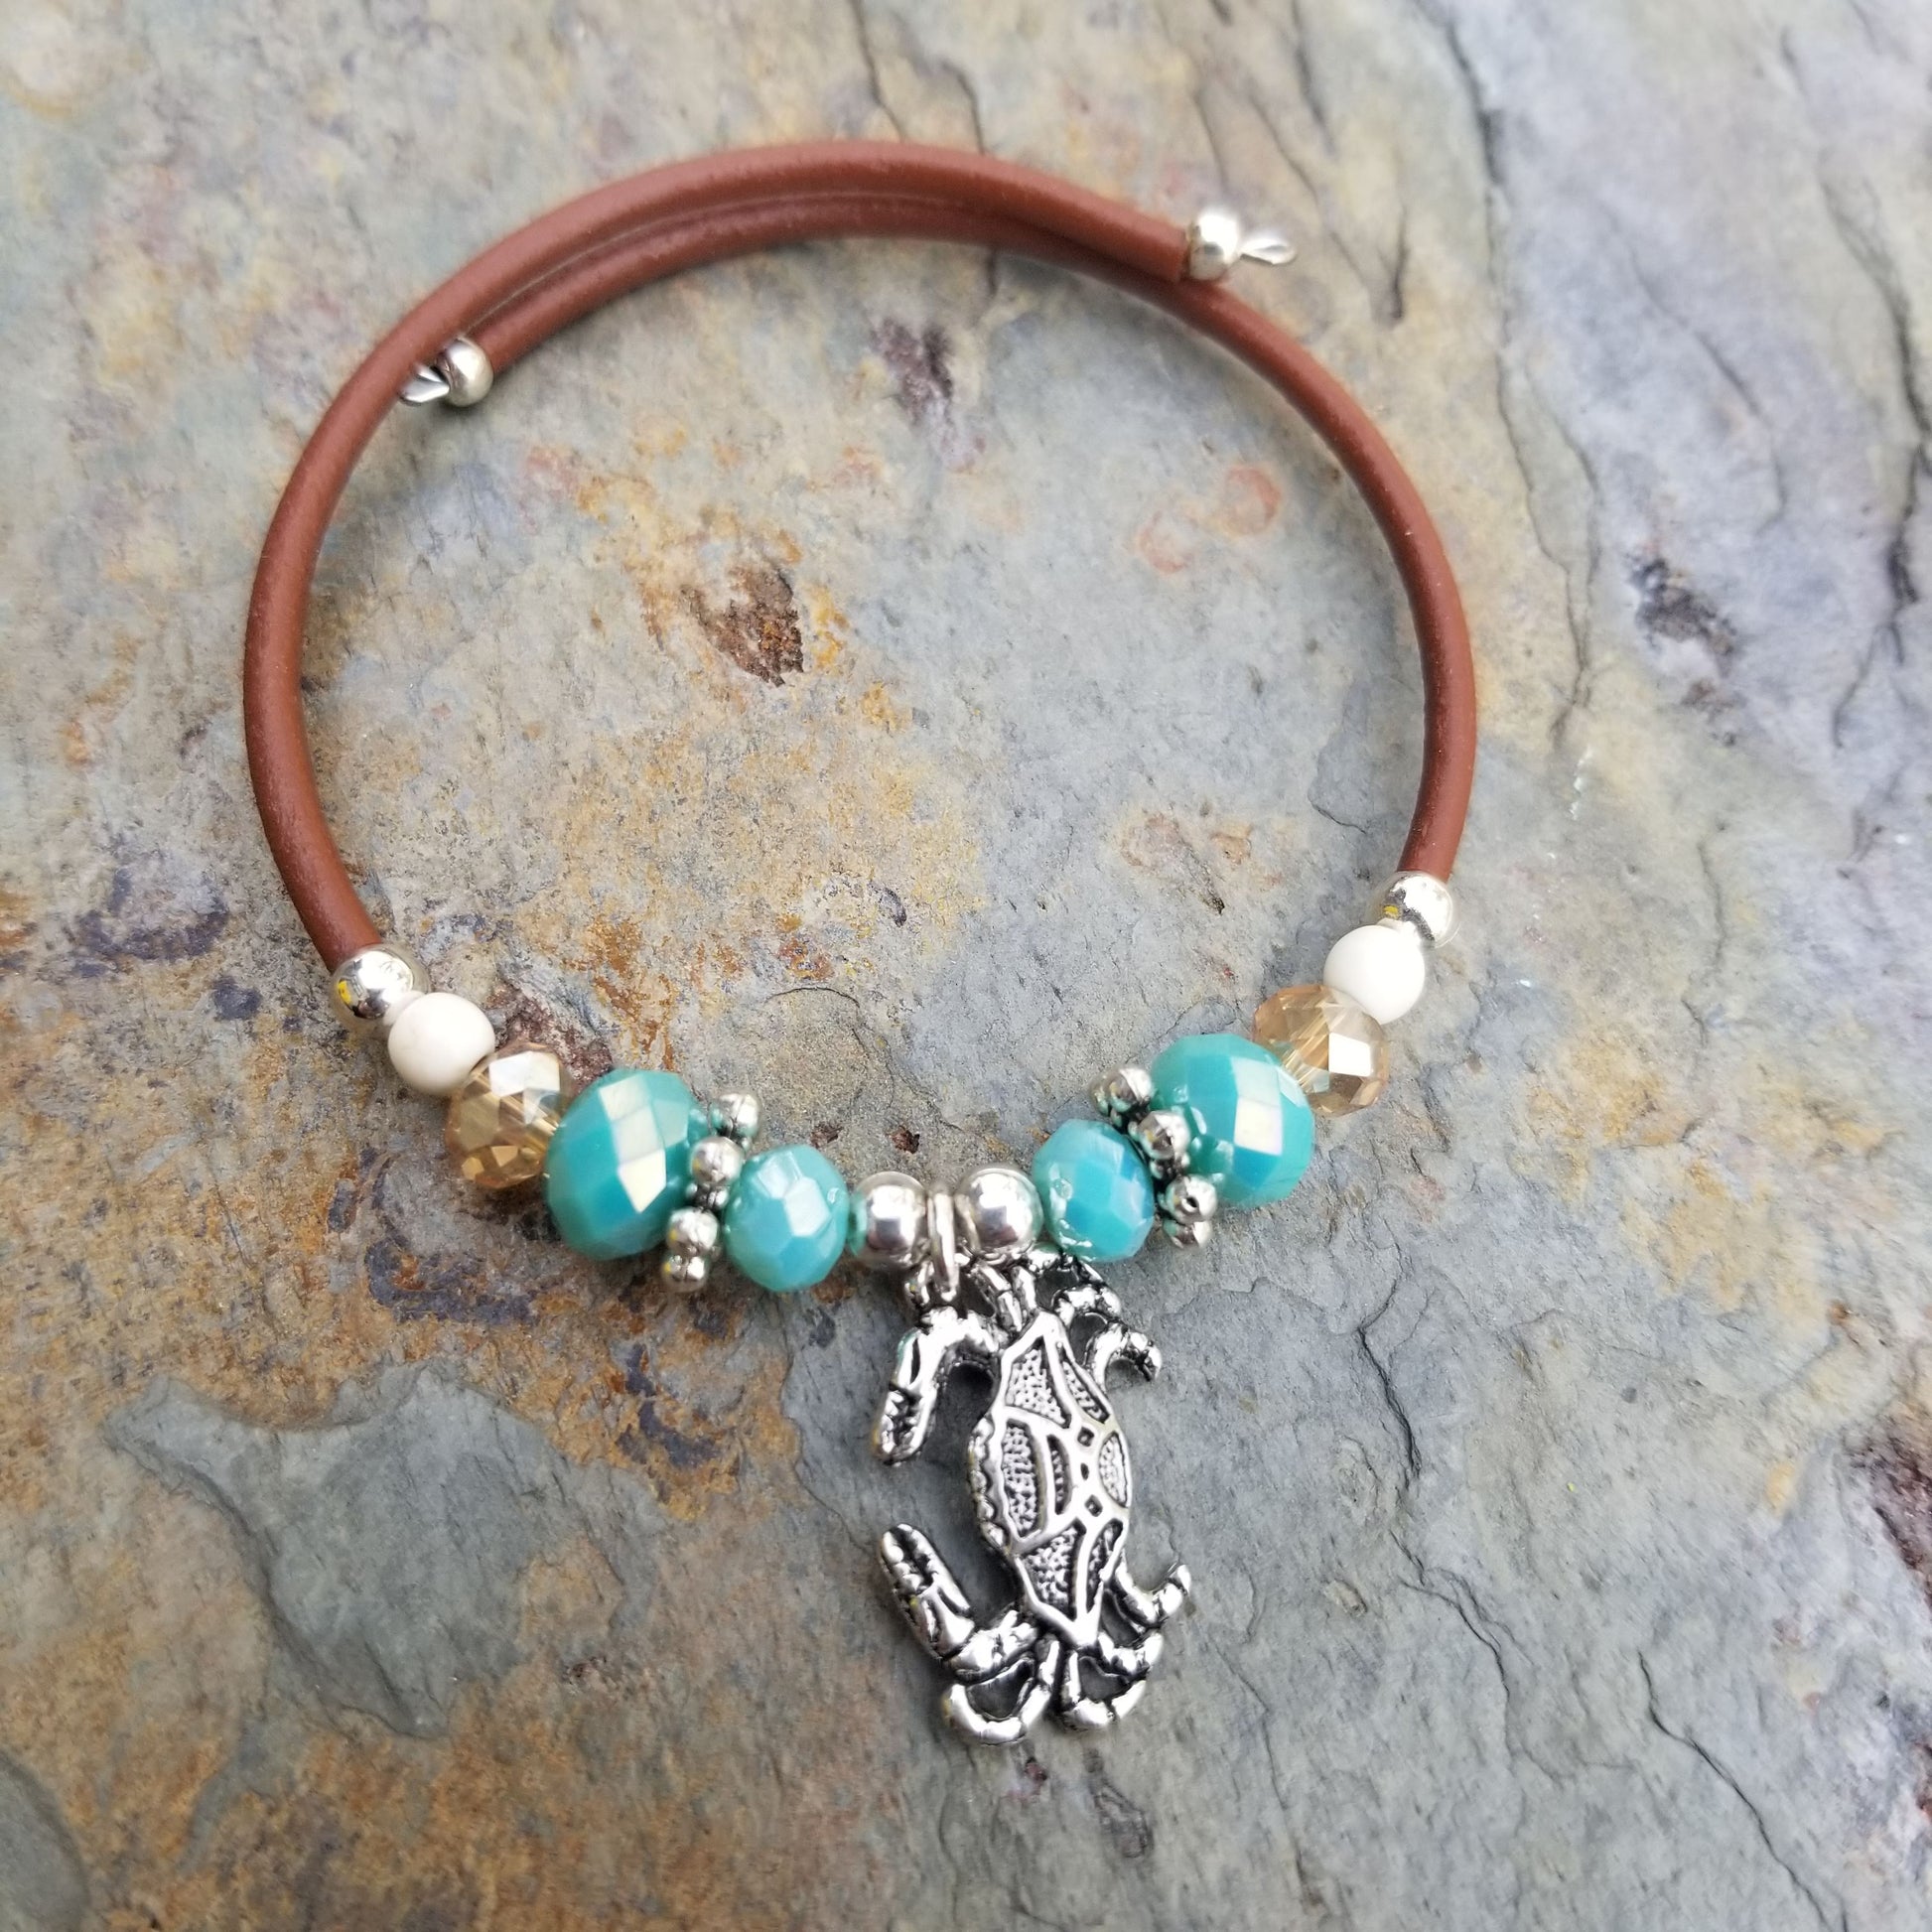 Wrap Bracelet - crab pewter charm with mix aqua and sandy colored beads